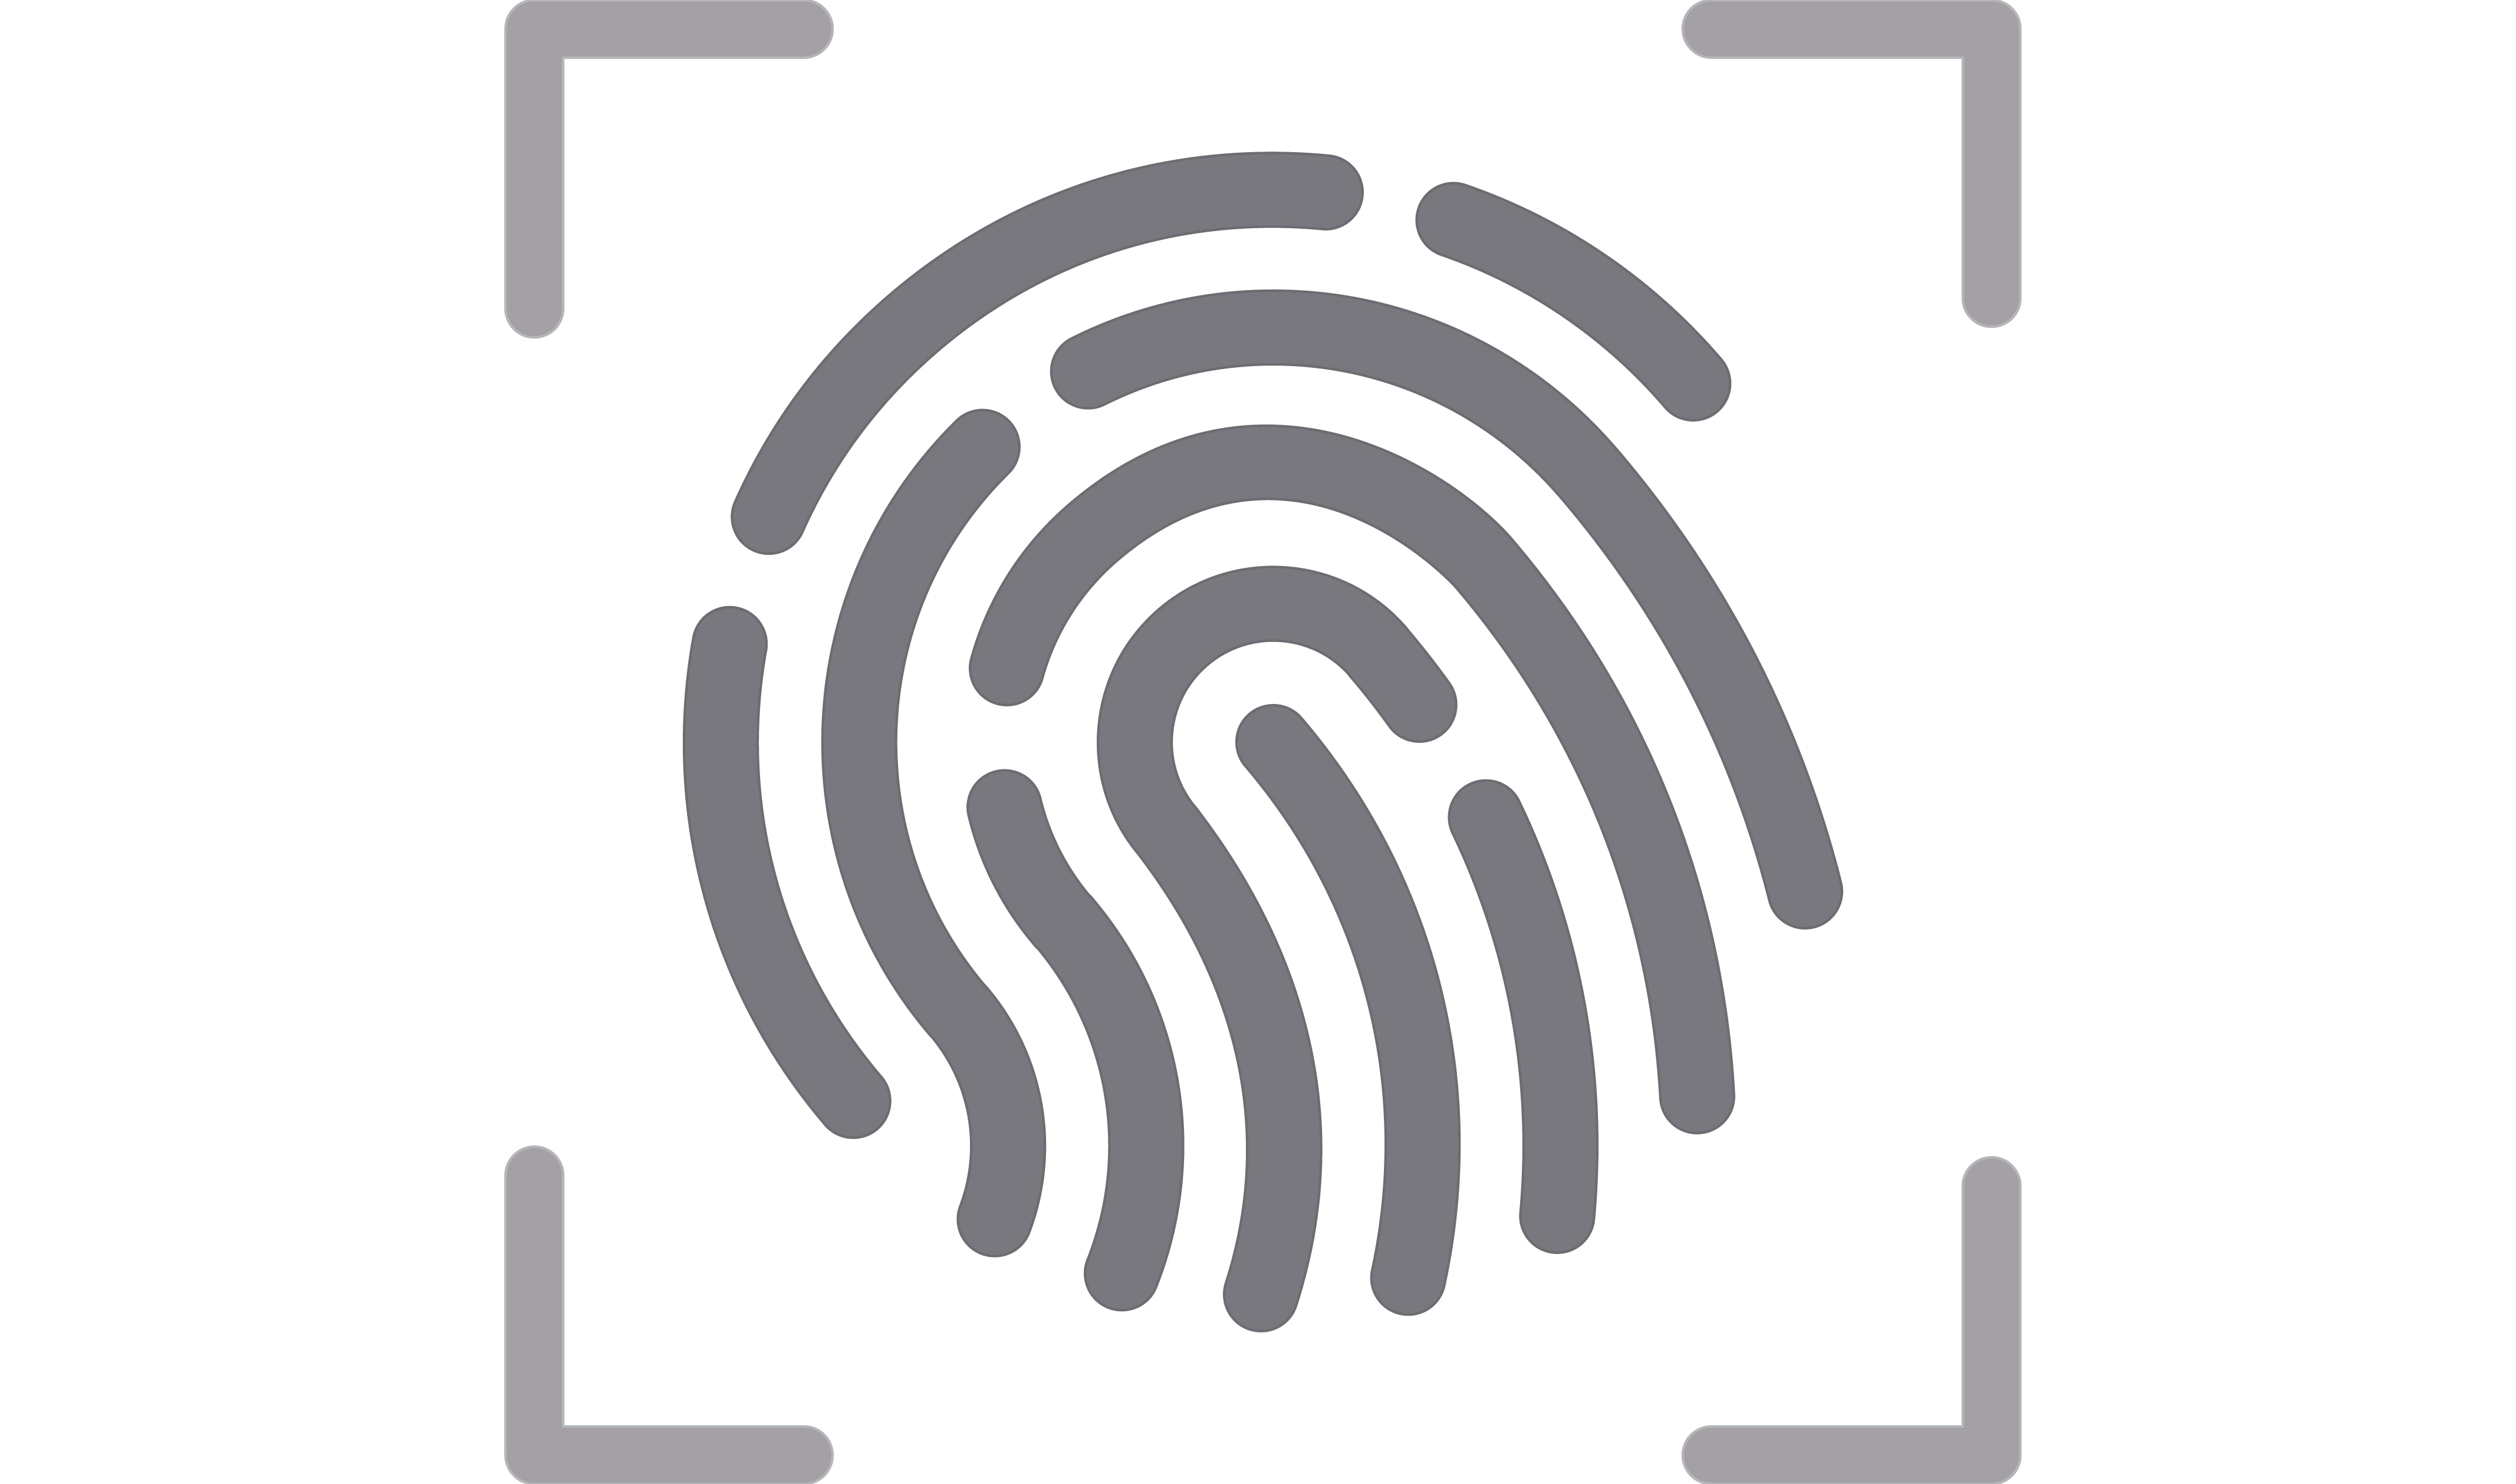 An icon of a finger print